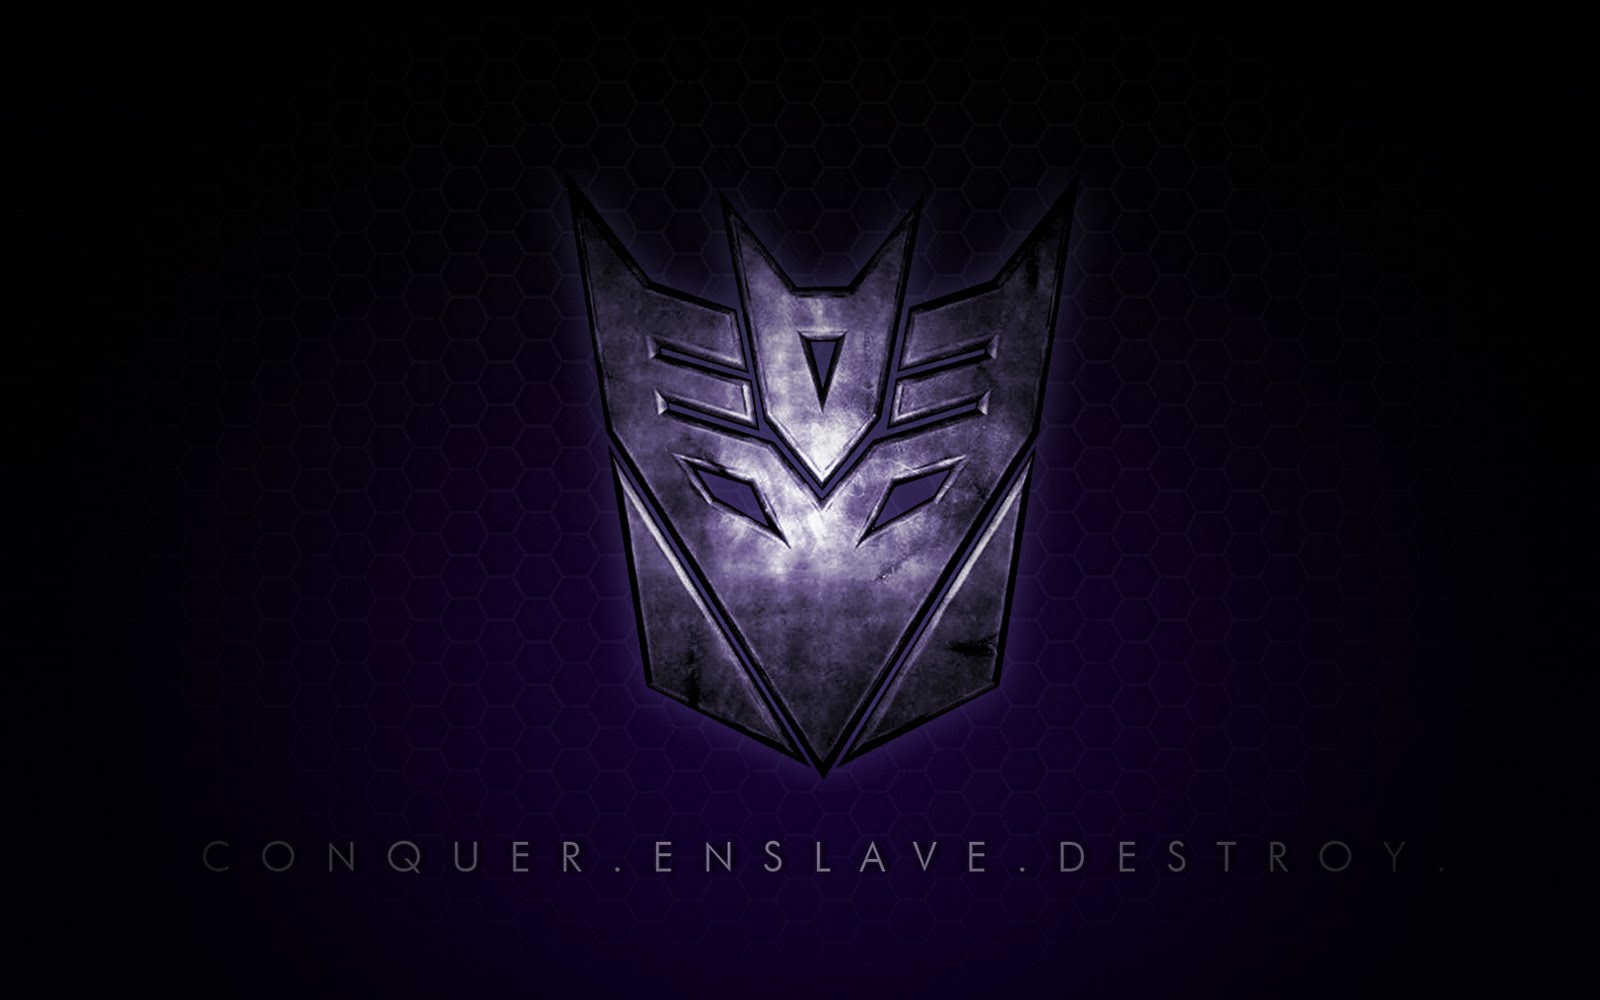 Decepticons Wallpaper By James Brunner About Layers In Photoshop